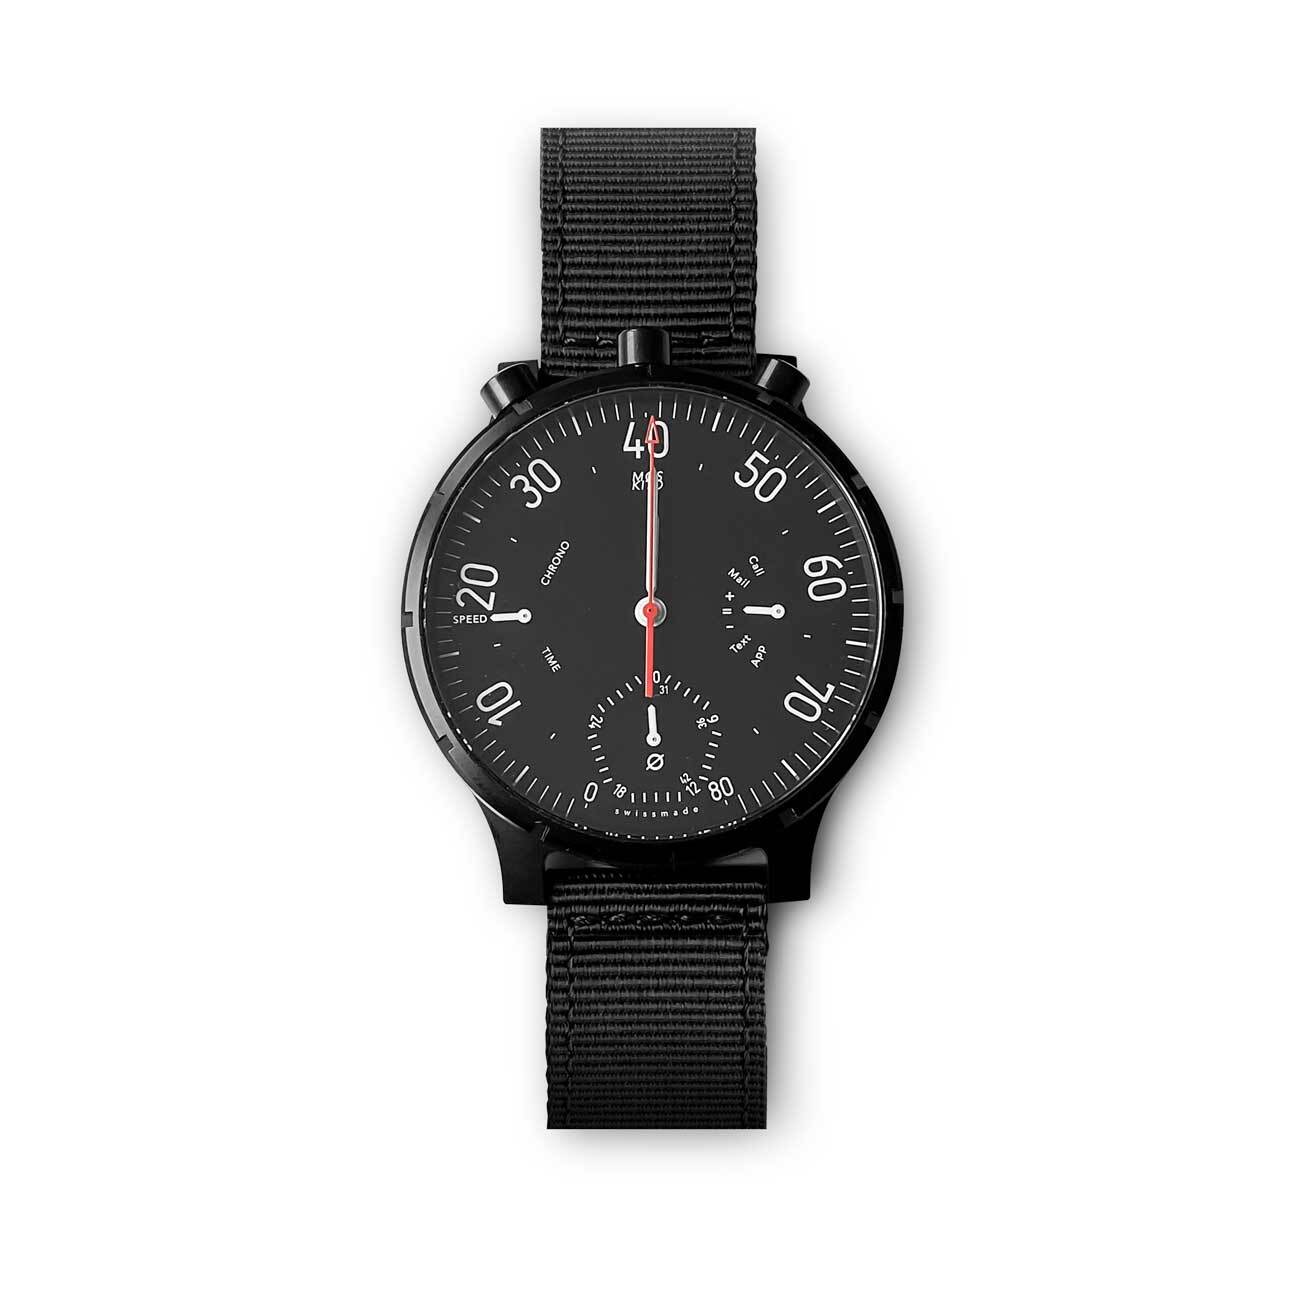 Suplest Moskito LTD. Special Edition Watch | The Odd Spoke